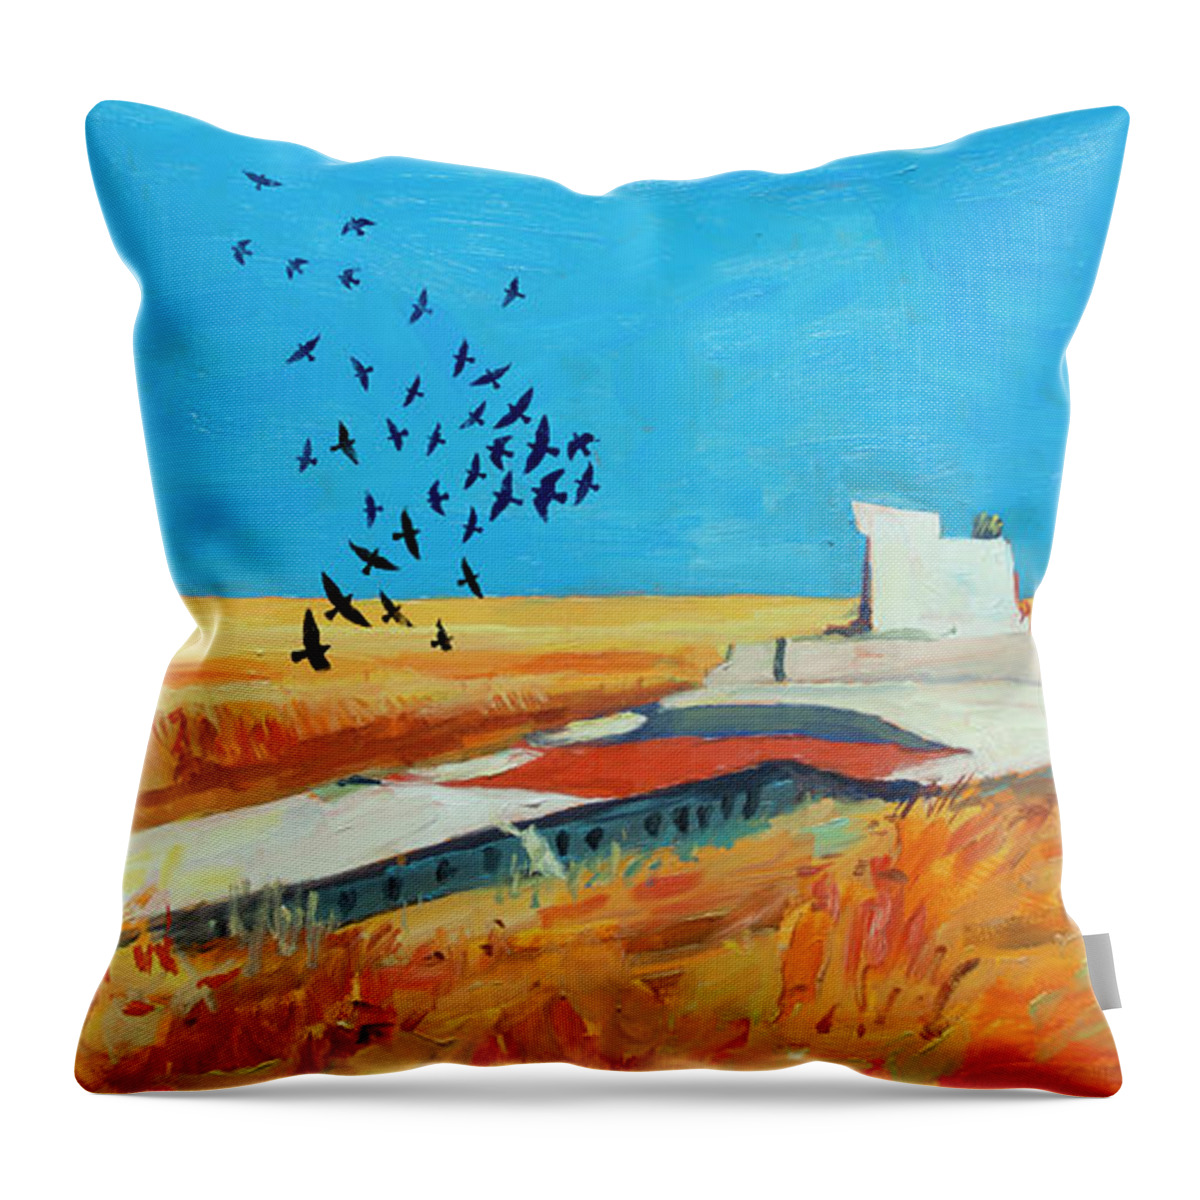 Mh17 Throw Pillow featuring the digital art When life bends for death by Nop Briex